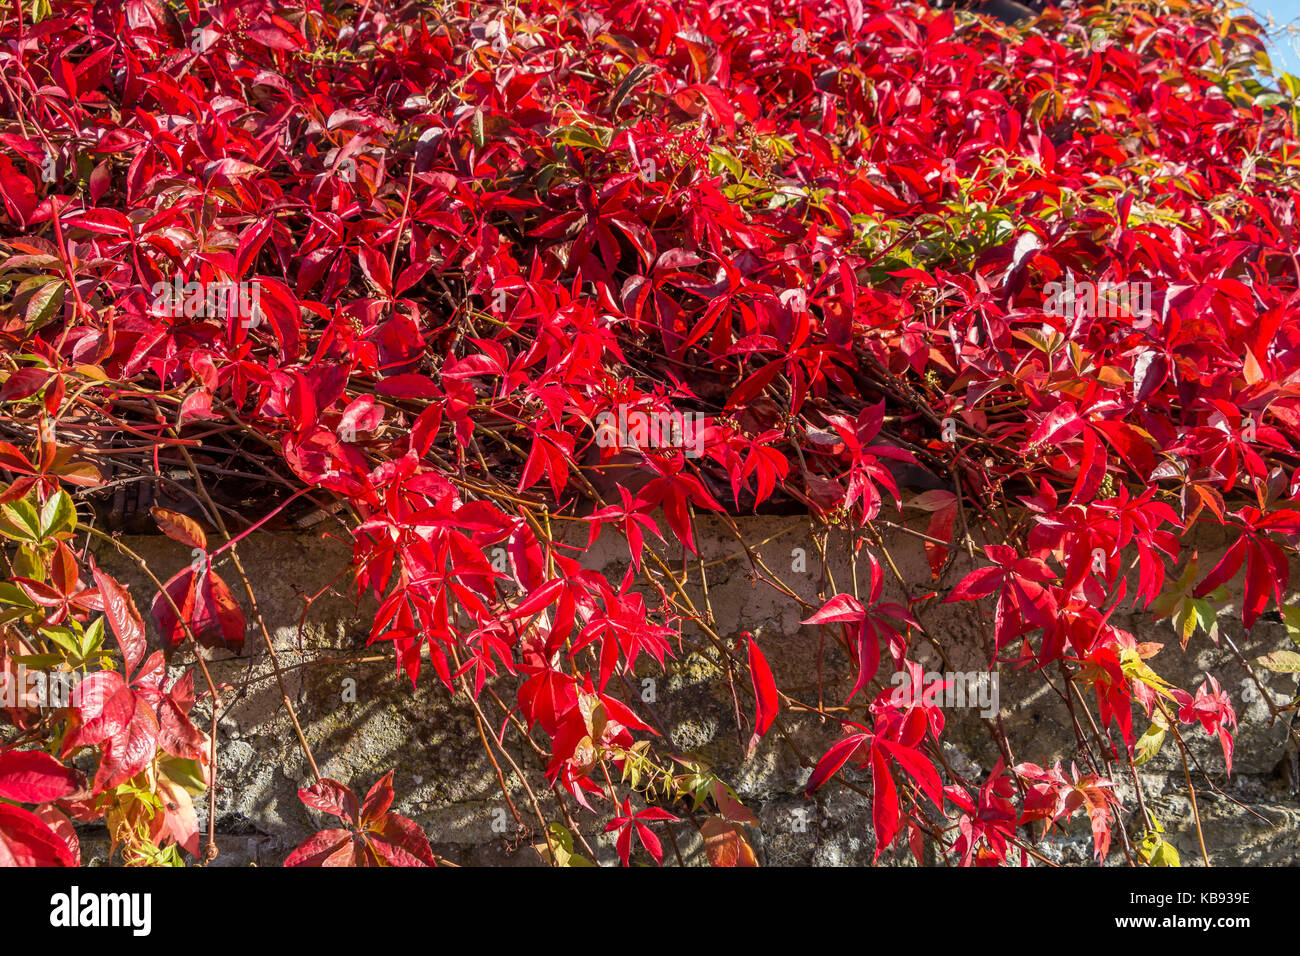 Autumn colour, flame red Virginia Creeper plant covering a stone barn September 2017 Stock Photo